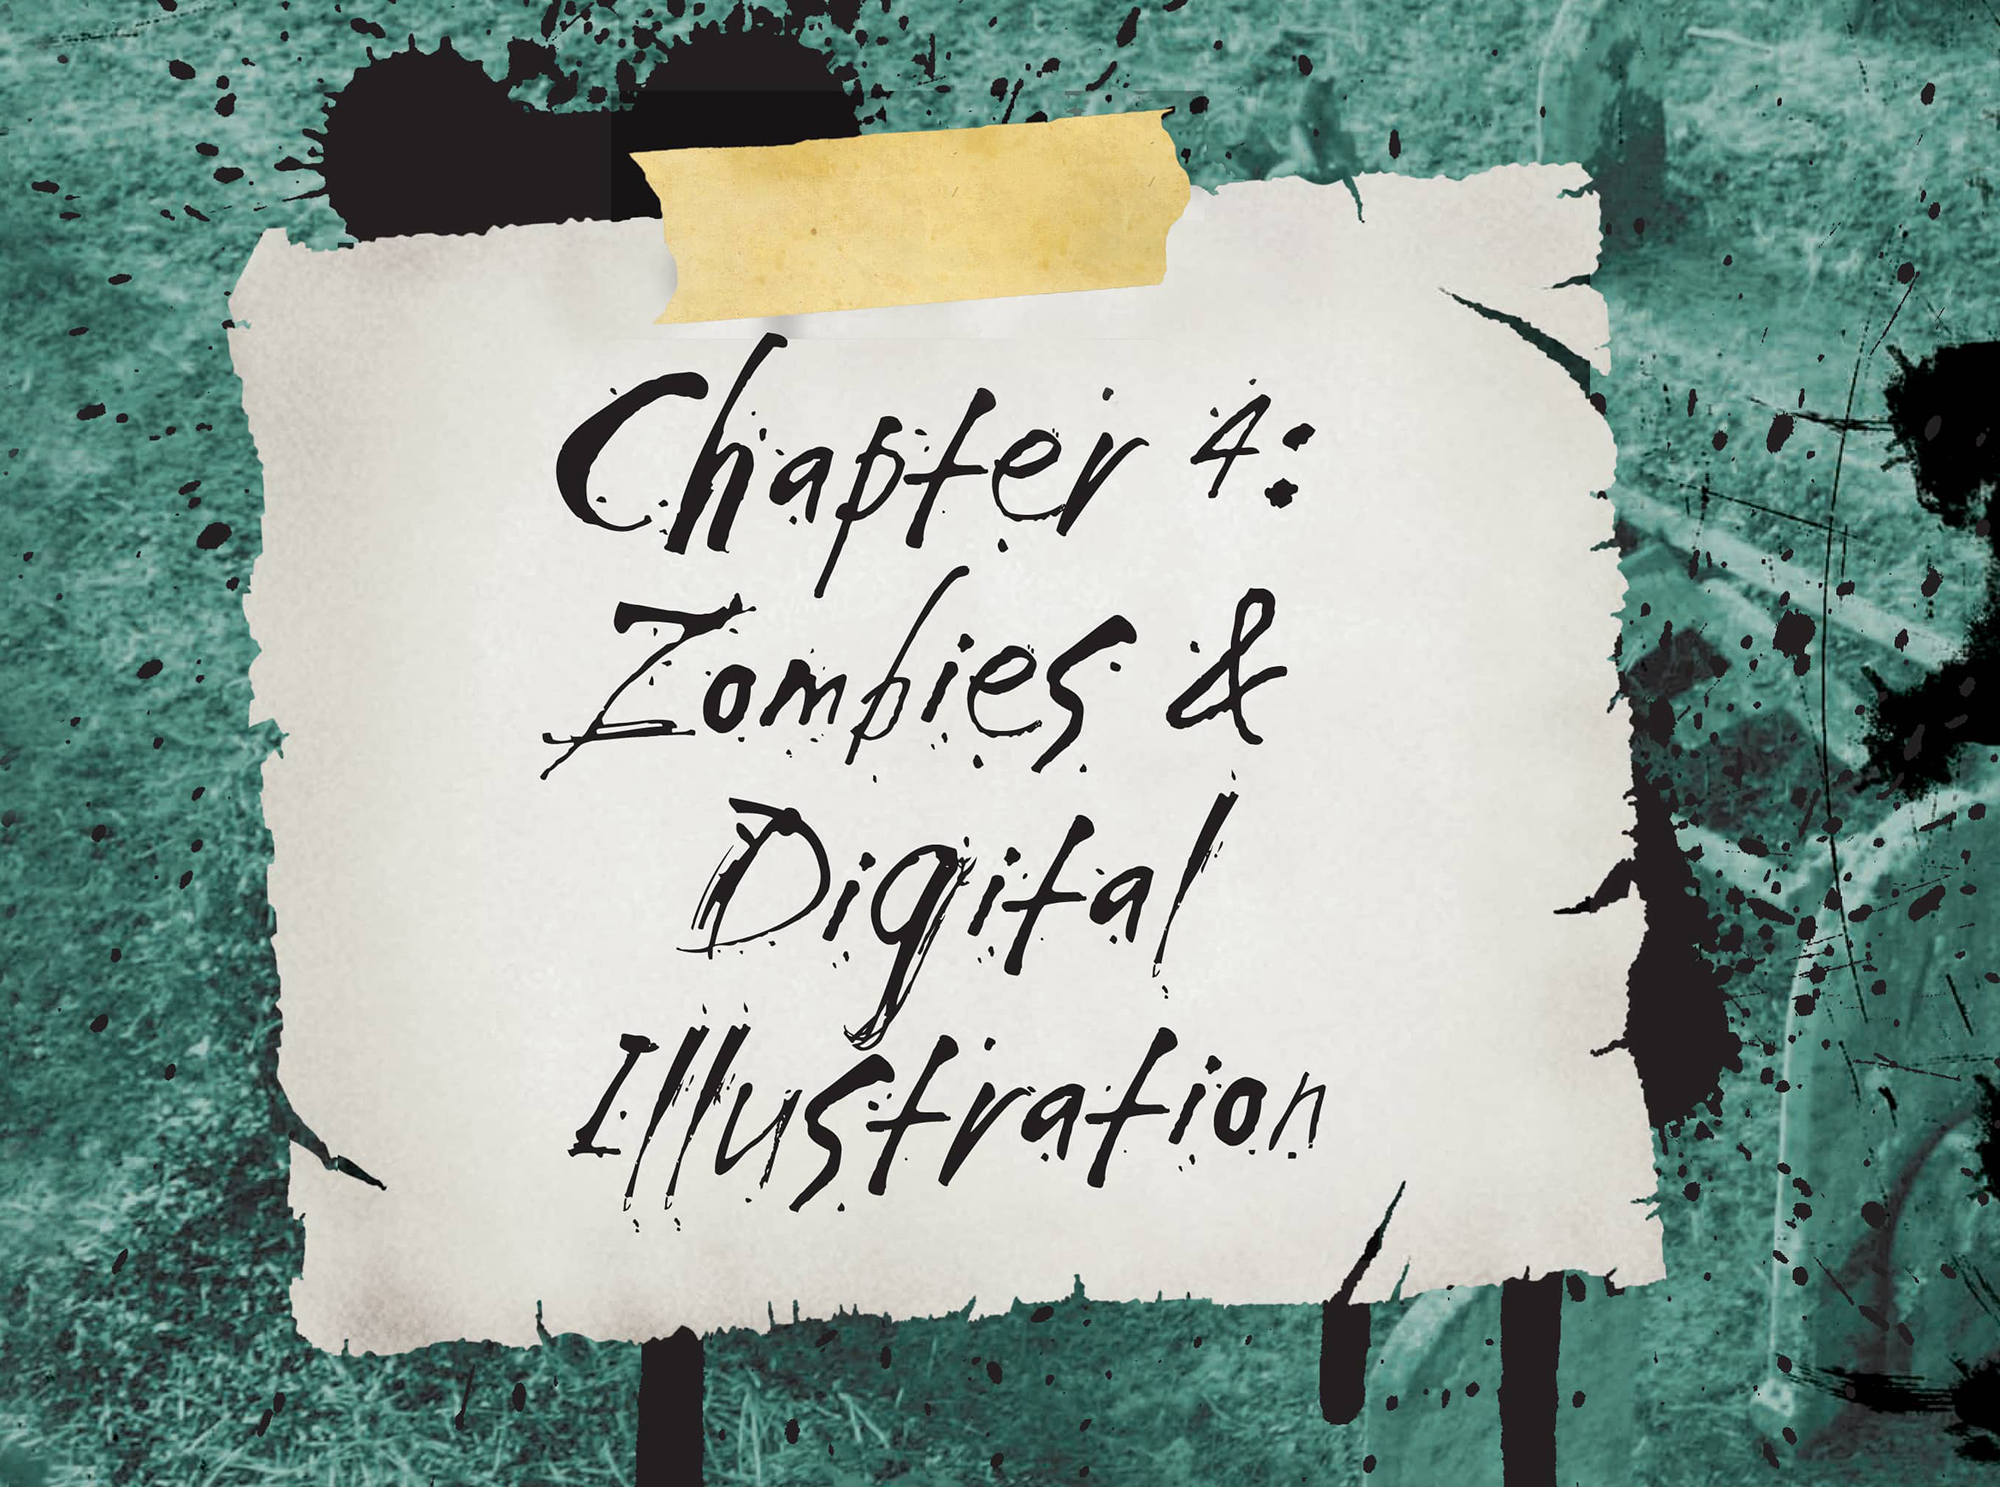 Chapter 4: Zombies & Digital Illustration